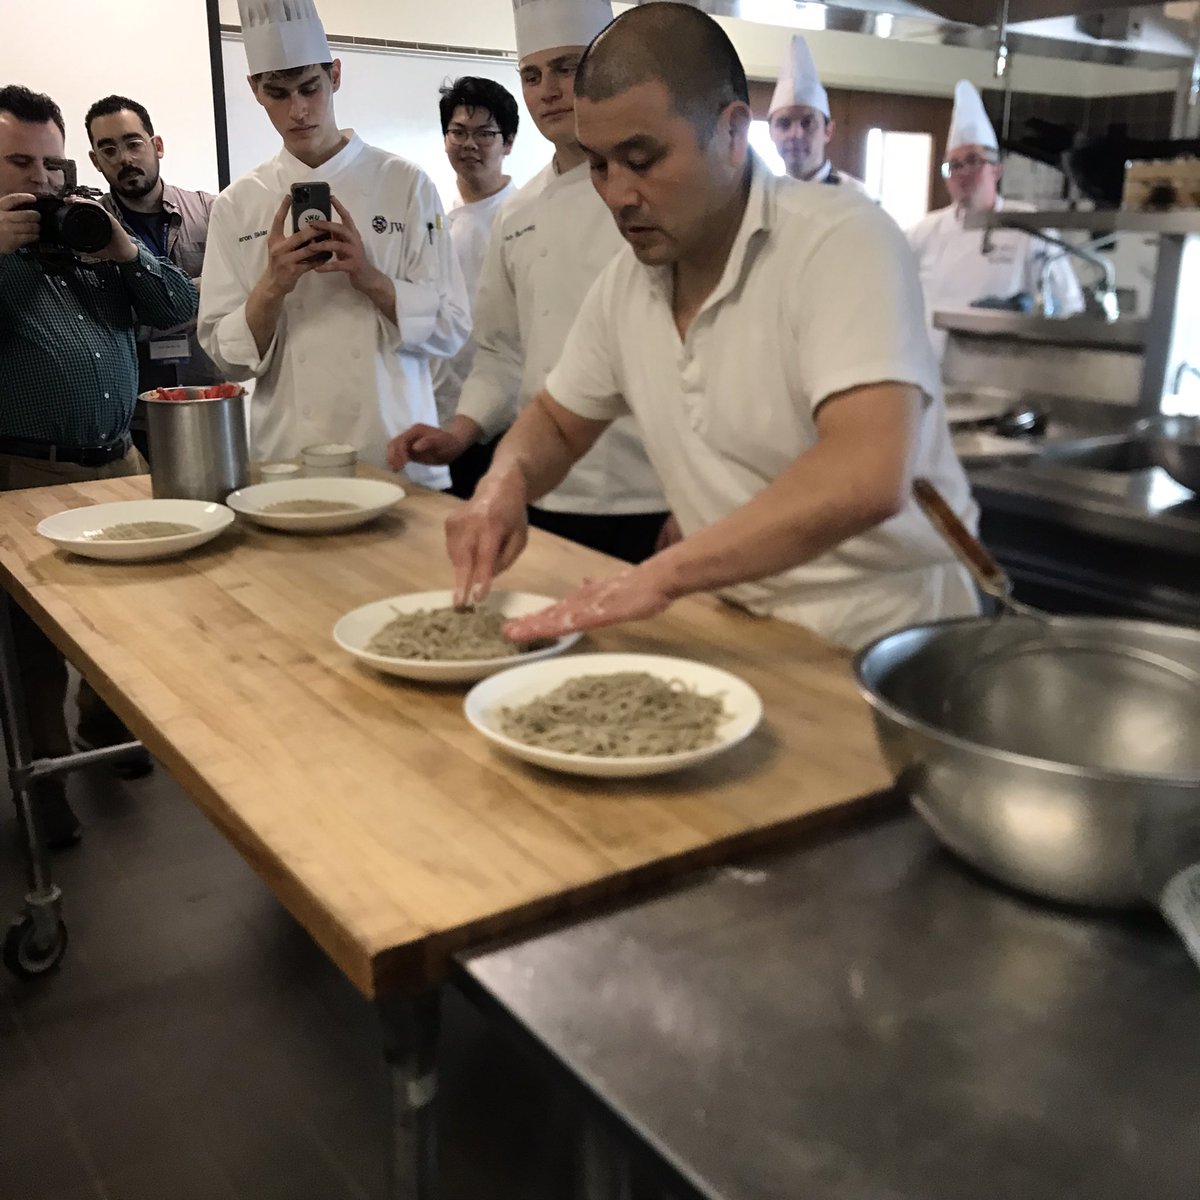 Yesterday I had the privilege of watching a Japanese buckwheat farmer (he doesn’t want to be called a chef) make his specialty, soba. The finished noodle was flavorful and wonderfully chewy – so different than anything in the supermarket.